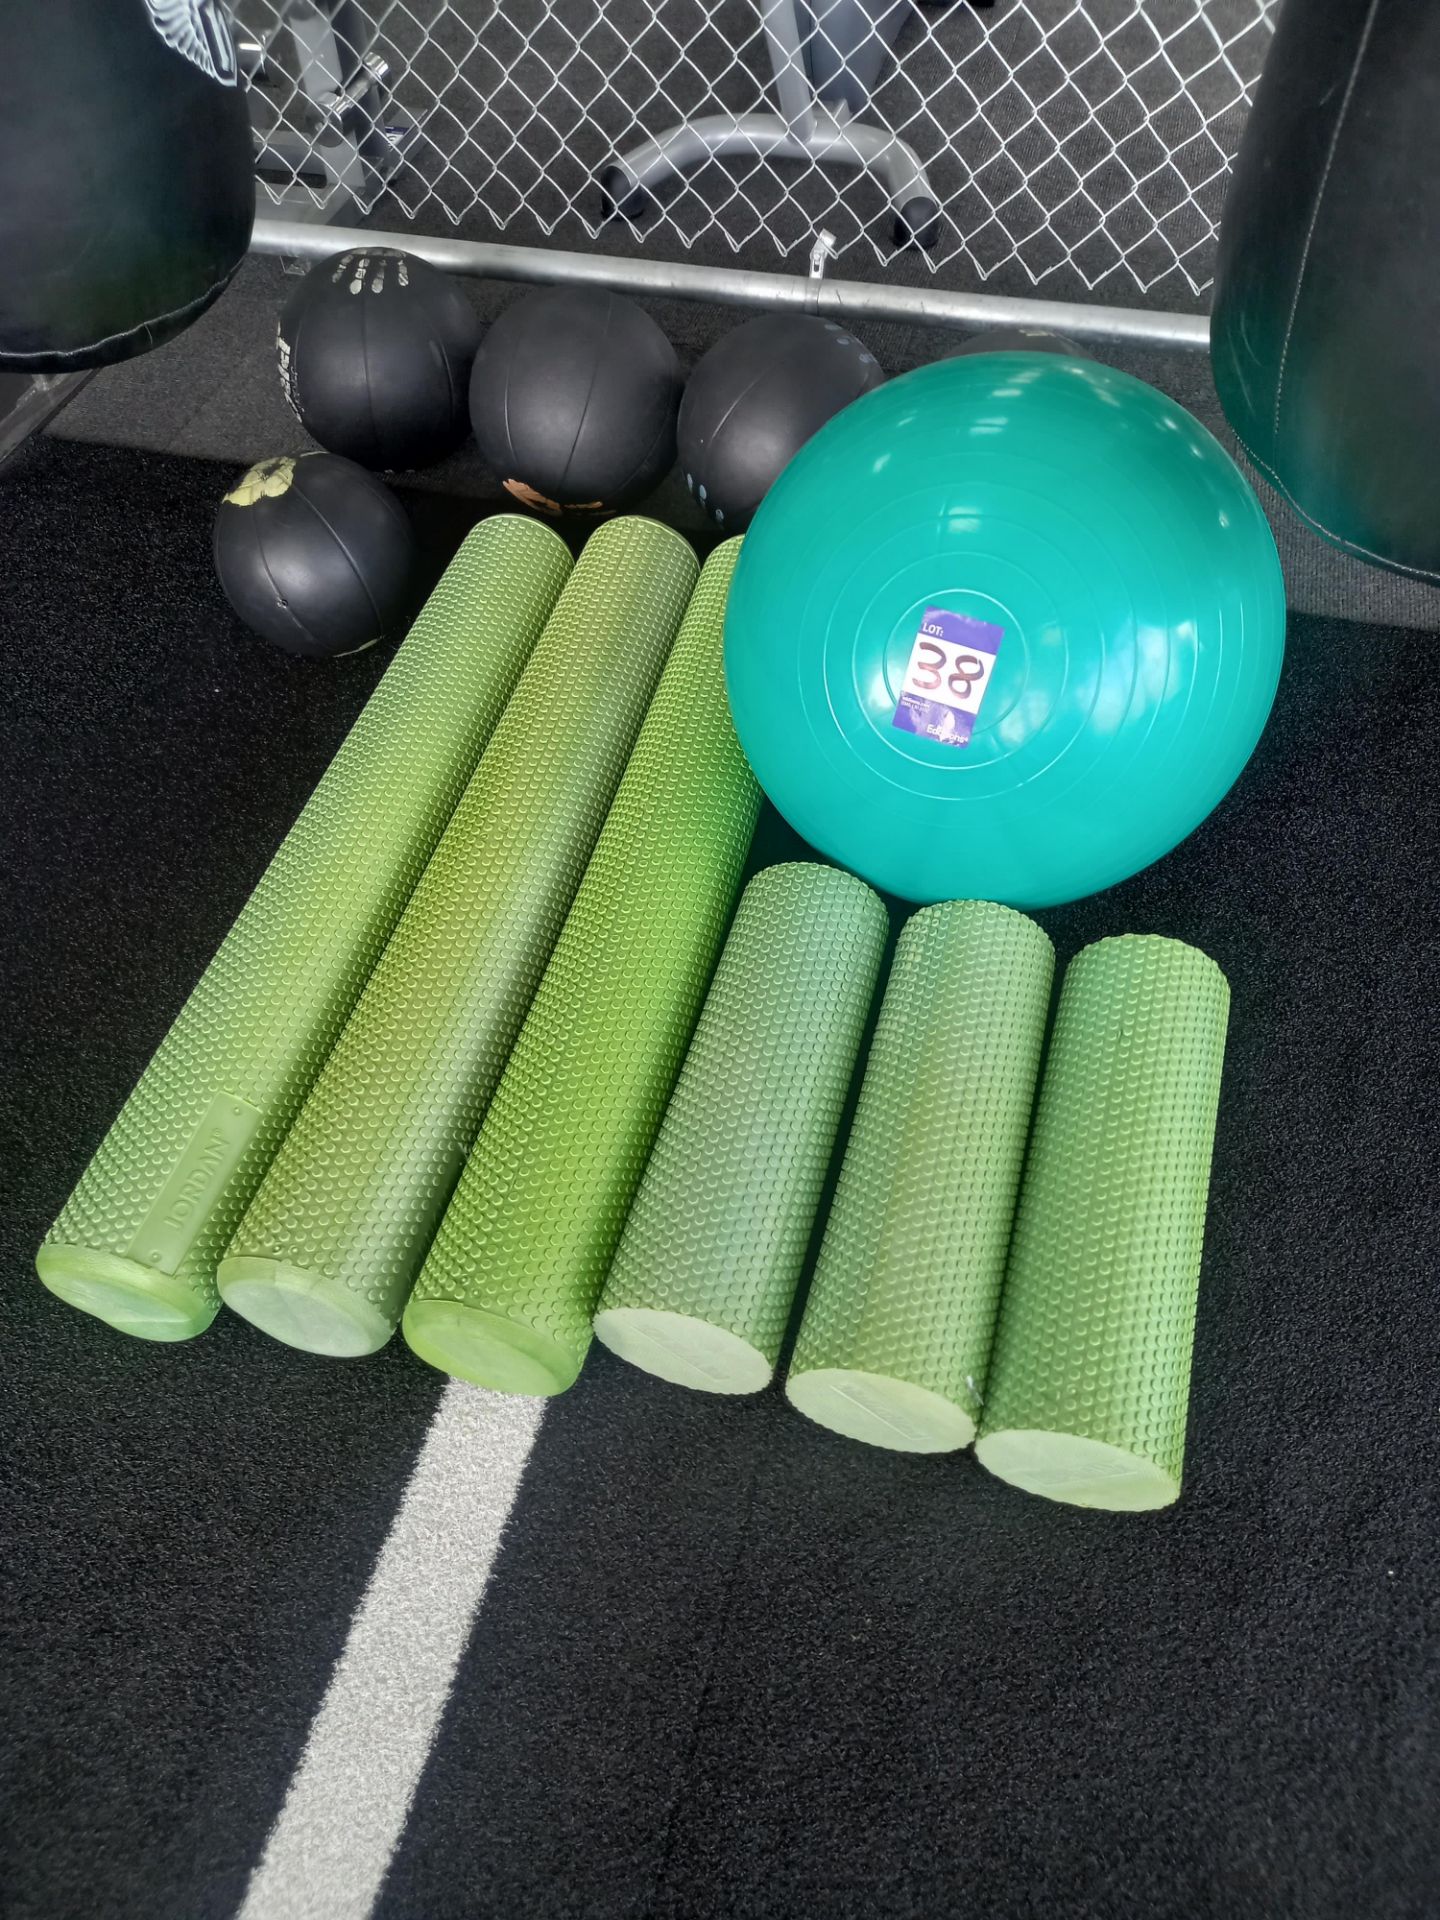 Gym Equipment Inc Core Foam Exercise Rollers, Medicine Balls and Balance Ball